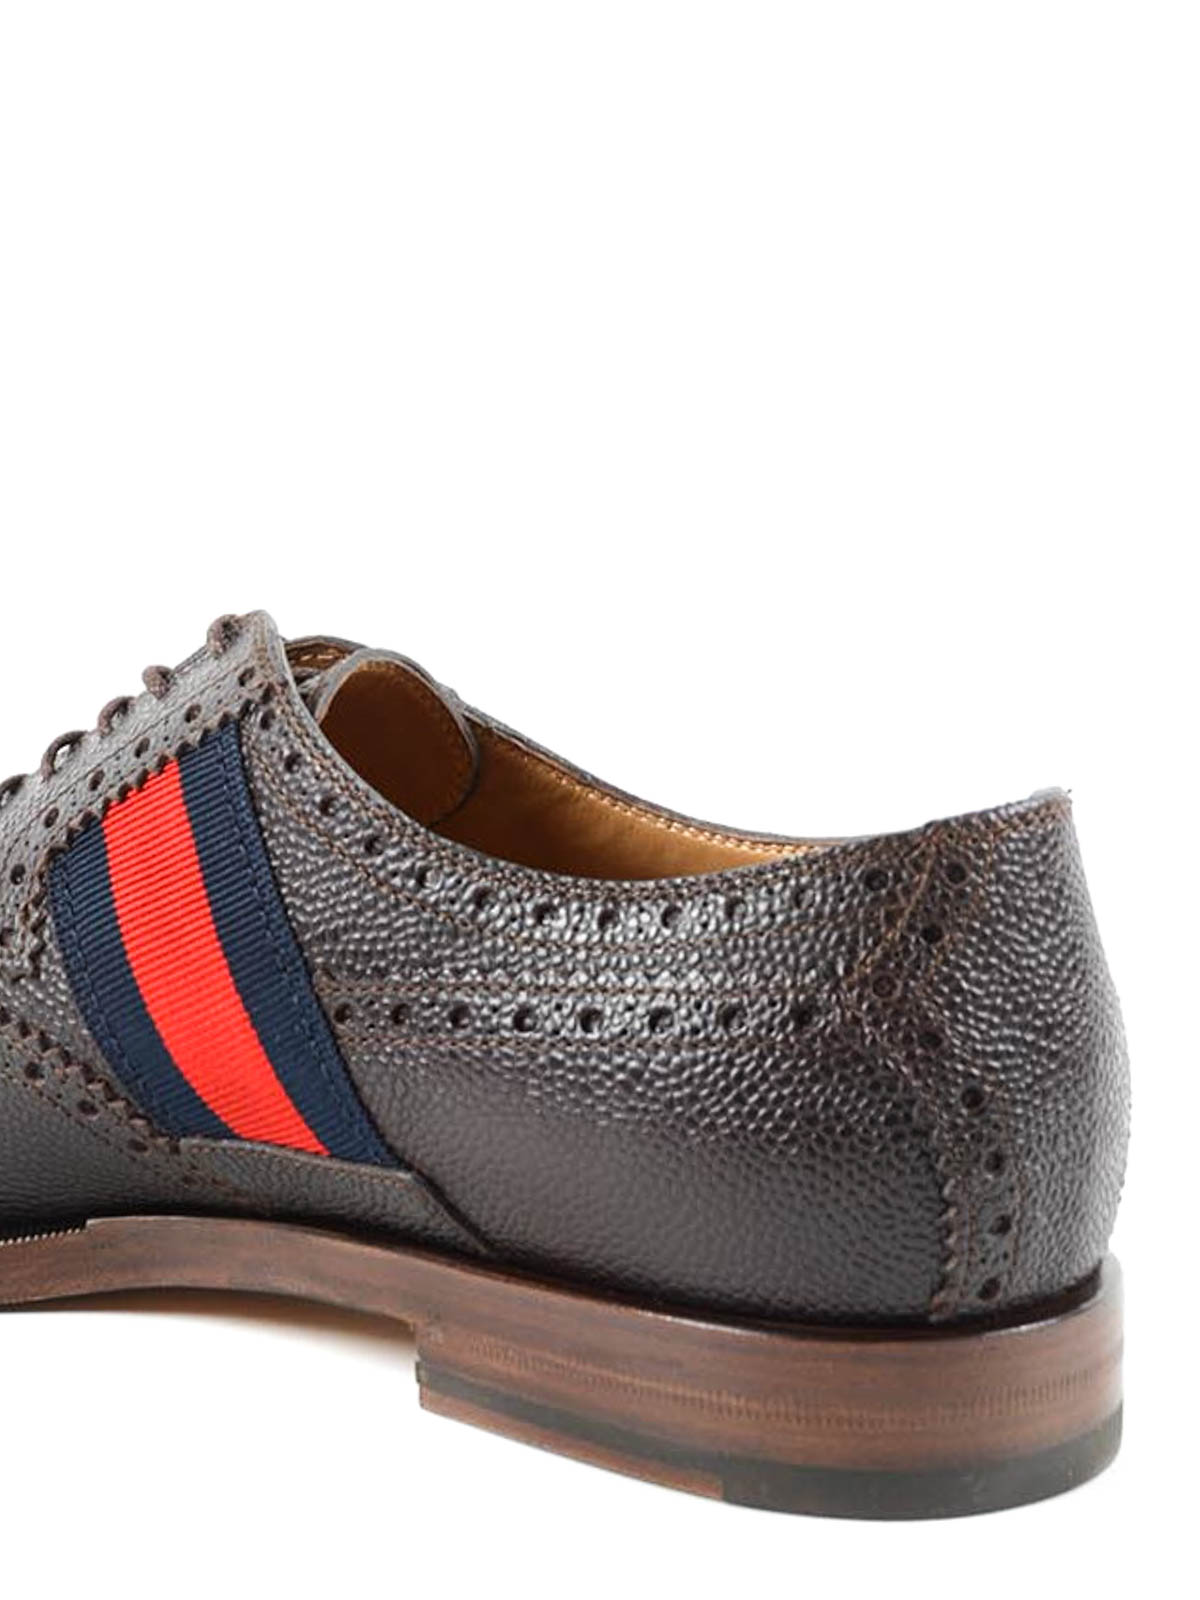 Gucci - Web detail leather brogues 